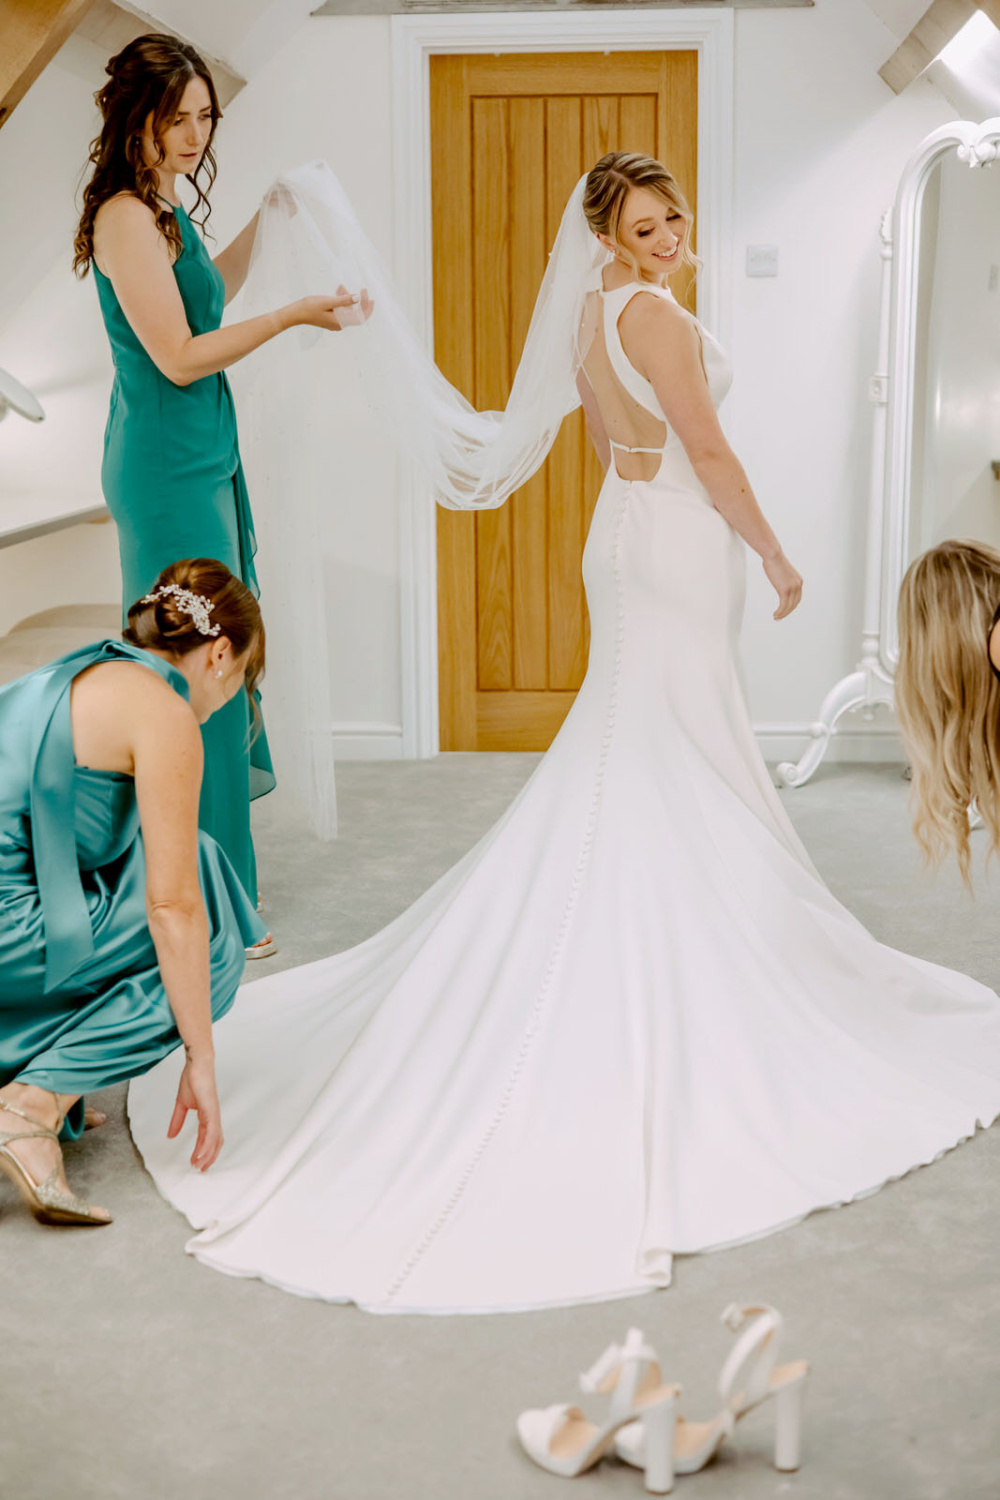 A bride getting ready in her wedding dress with her bridesmaids.